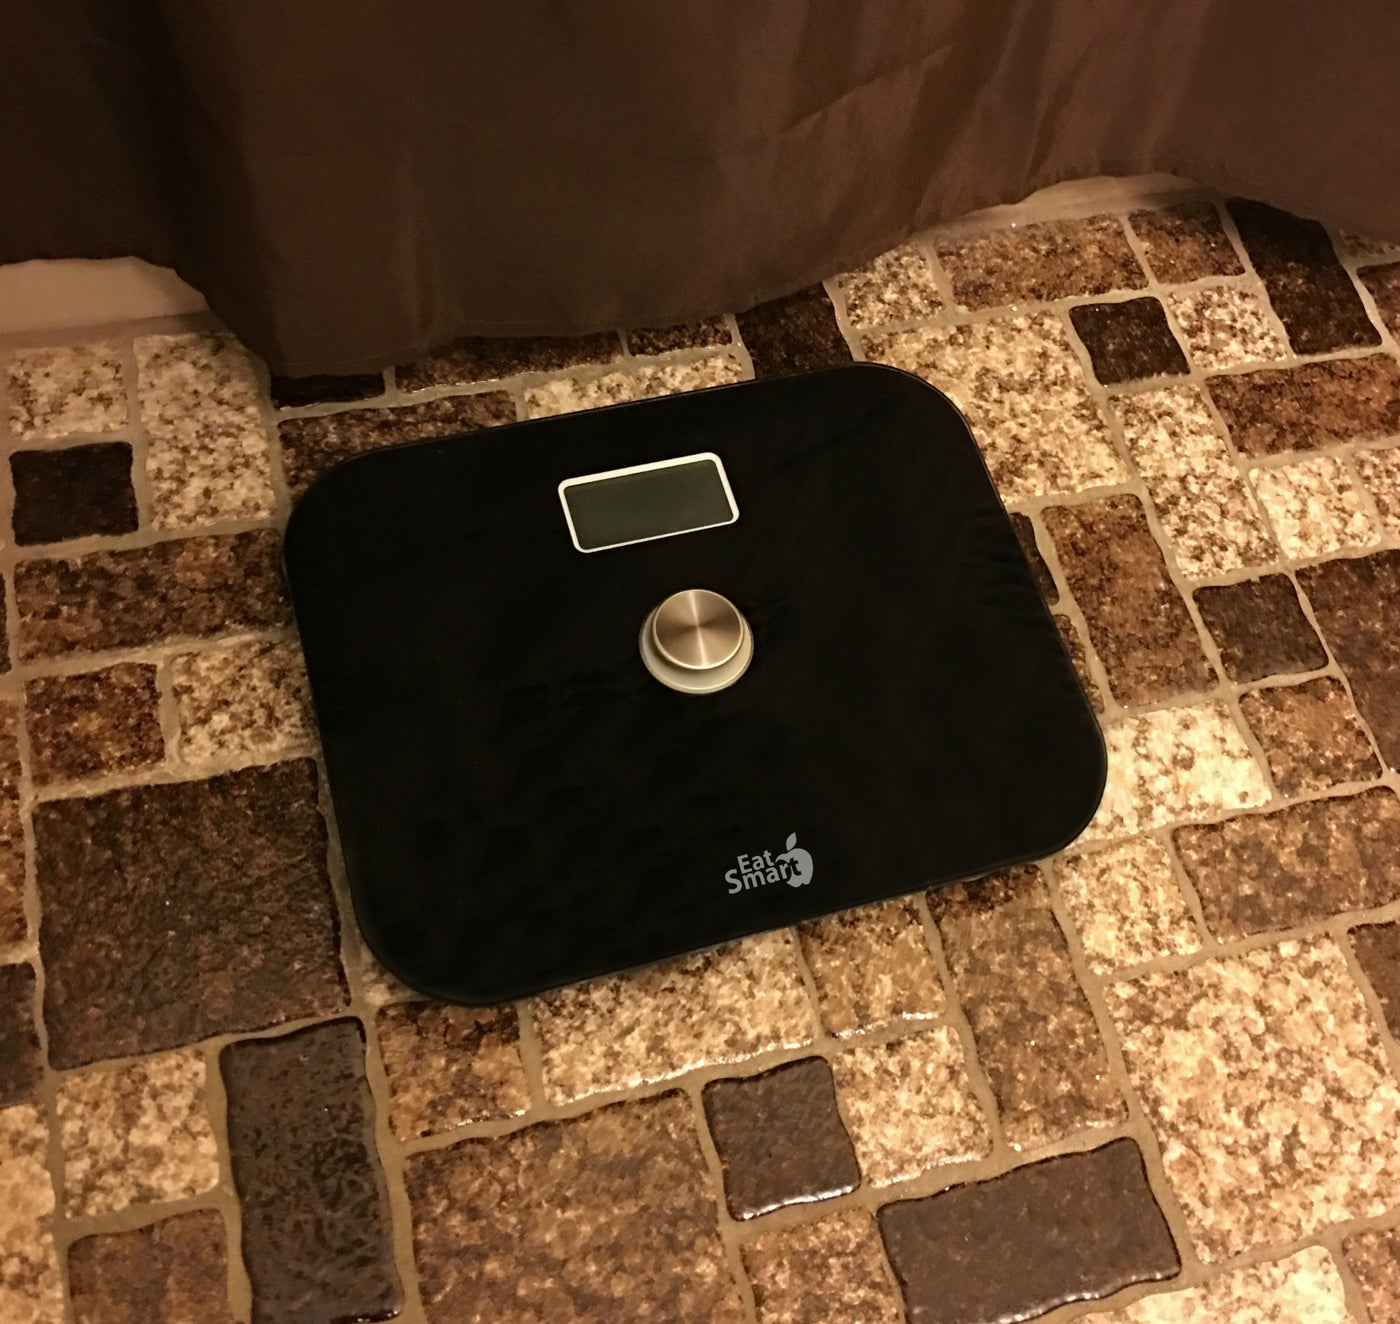 Introducing the Precision Power Battery Free Digital Scale – Eat Smart